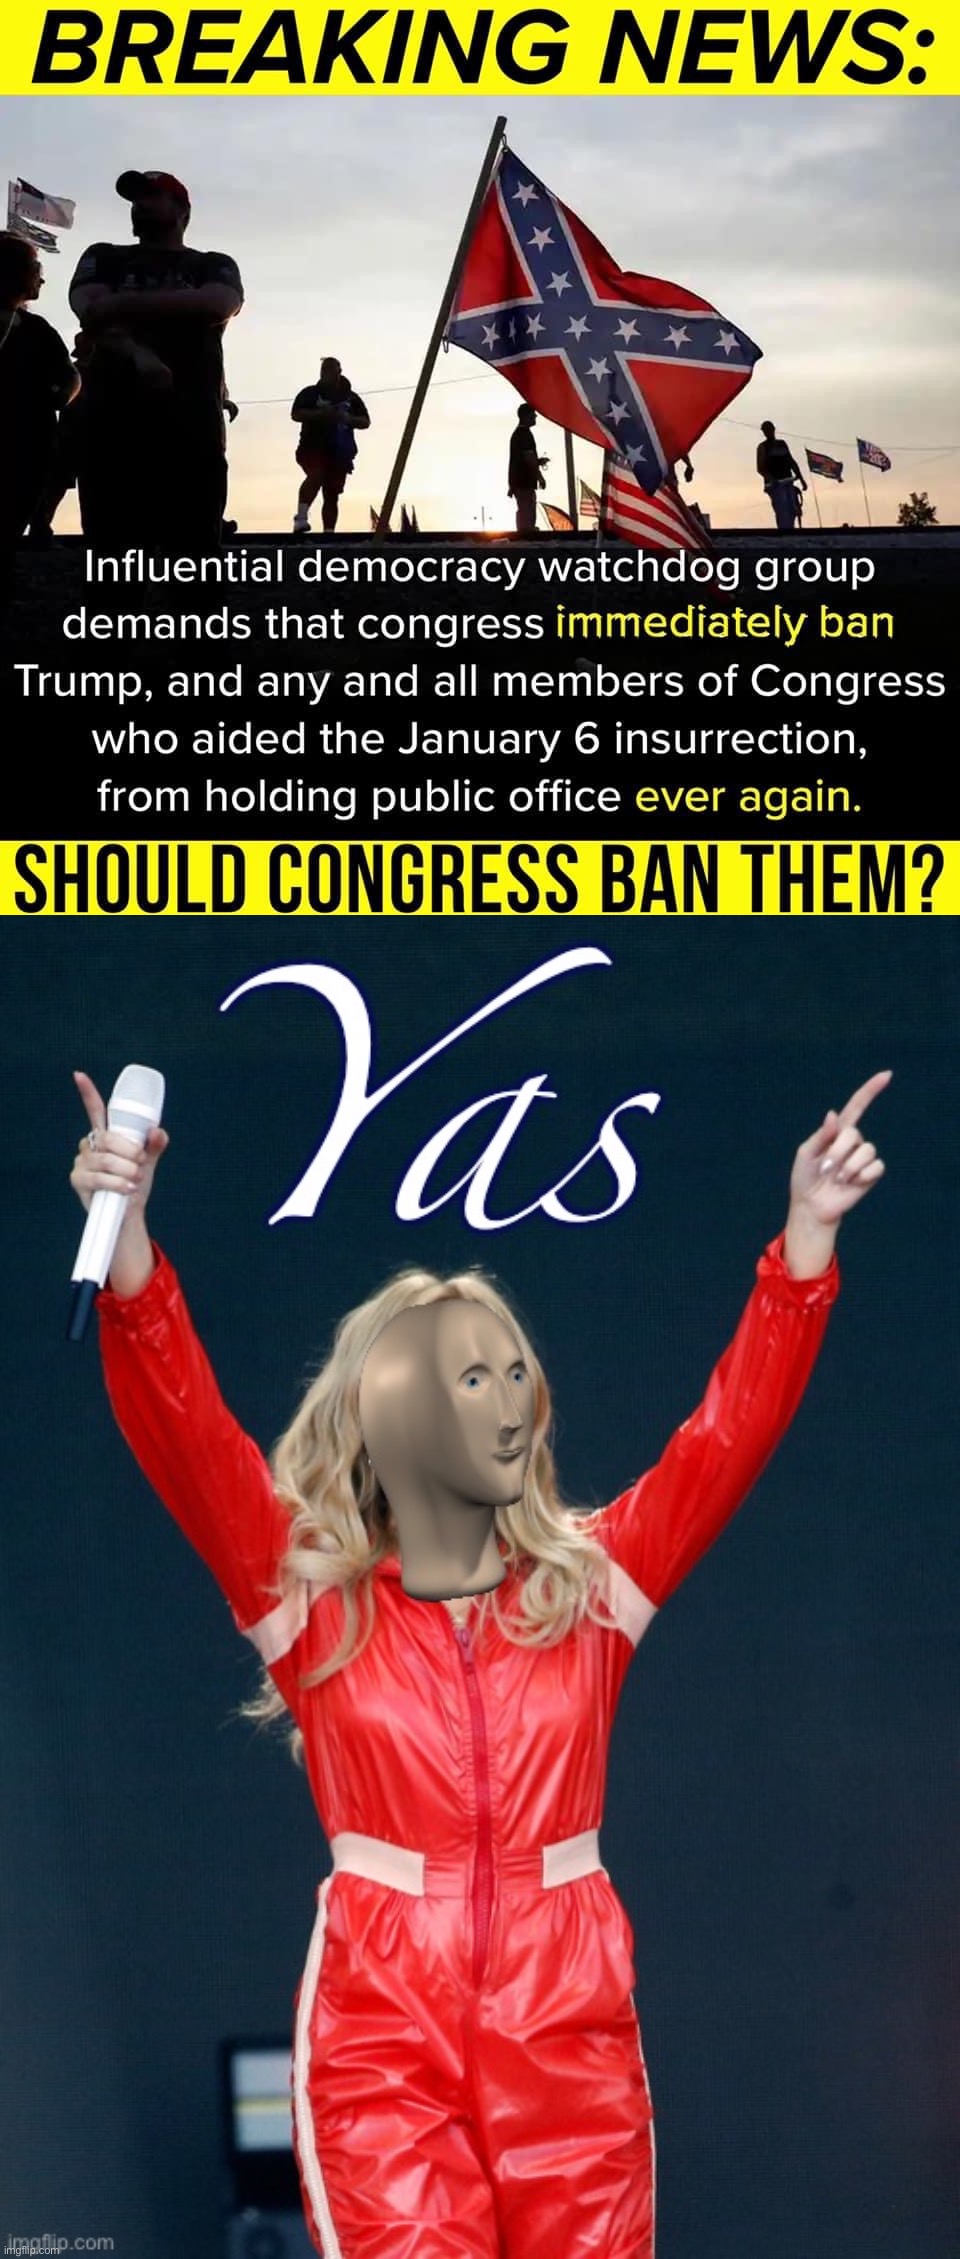 Banning fascists from playing: It’s what healthy democracies do! | image tagged in jan 6 republicans,kylie yas,fascism,fascists,democracy,i love democracy | made w/ Imgflip meme maker